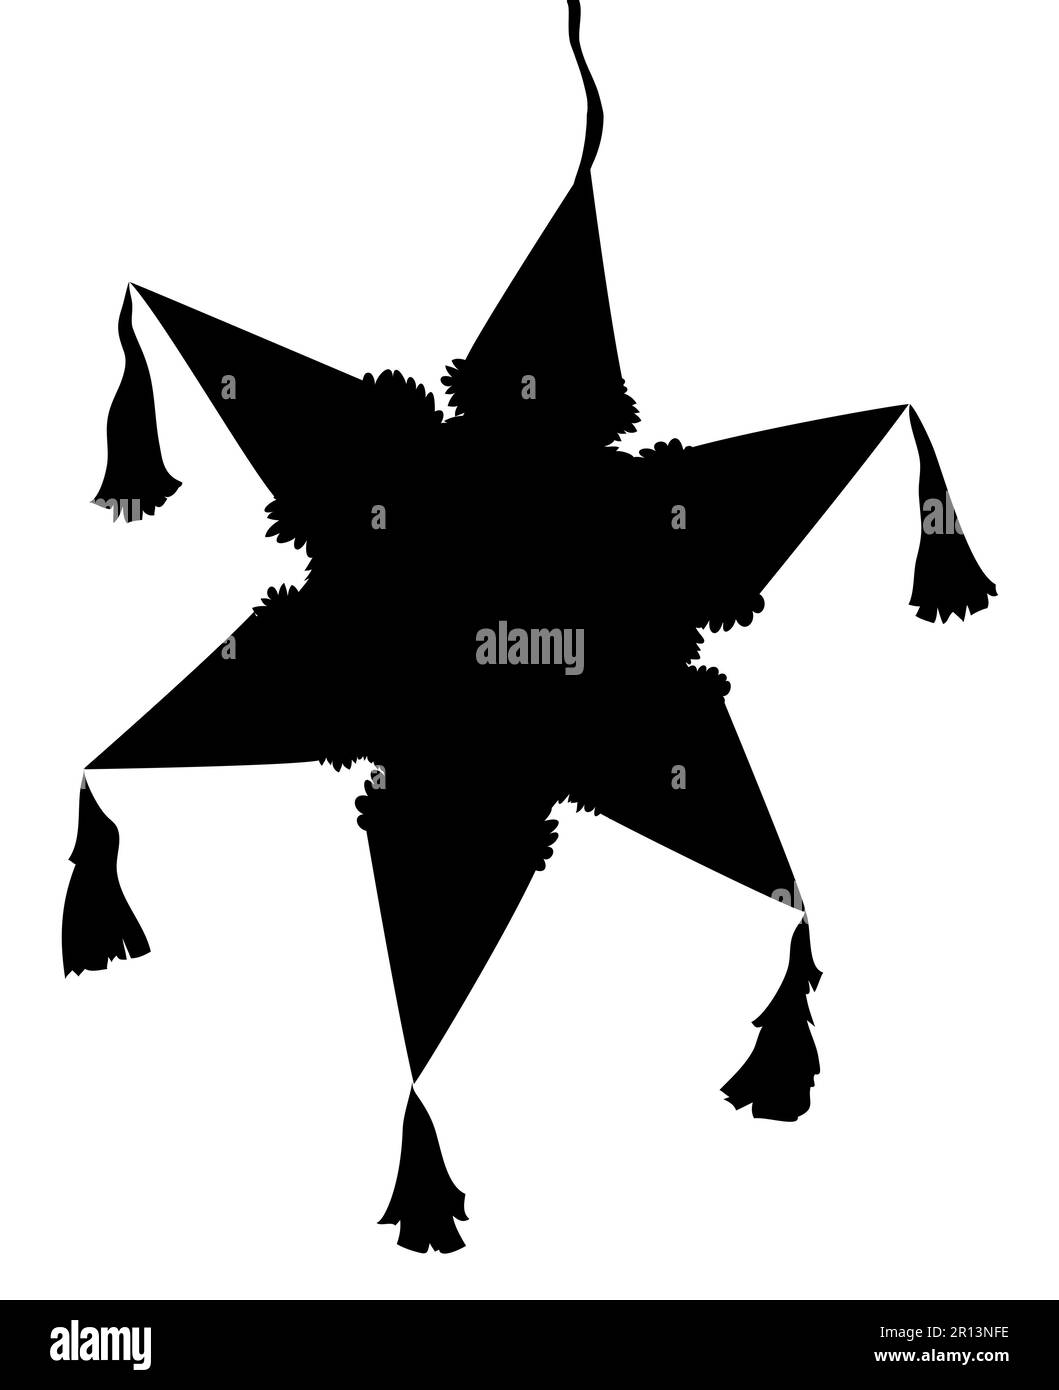 Black silhouette of a star-shaped hanging pinata on a white background. Stock Vector